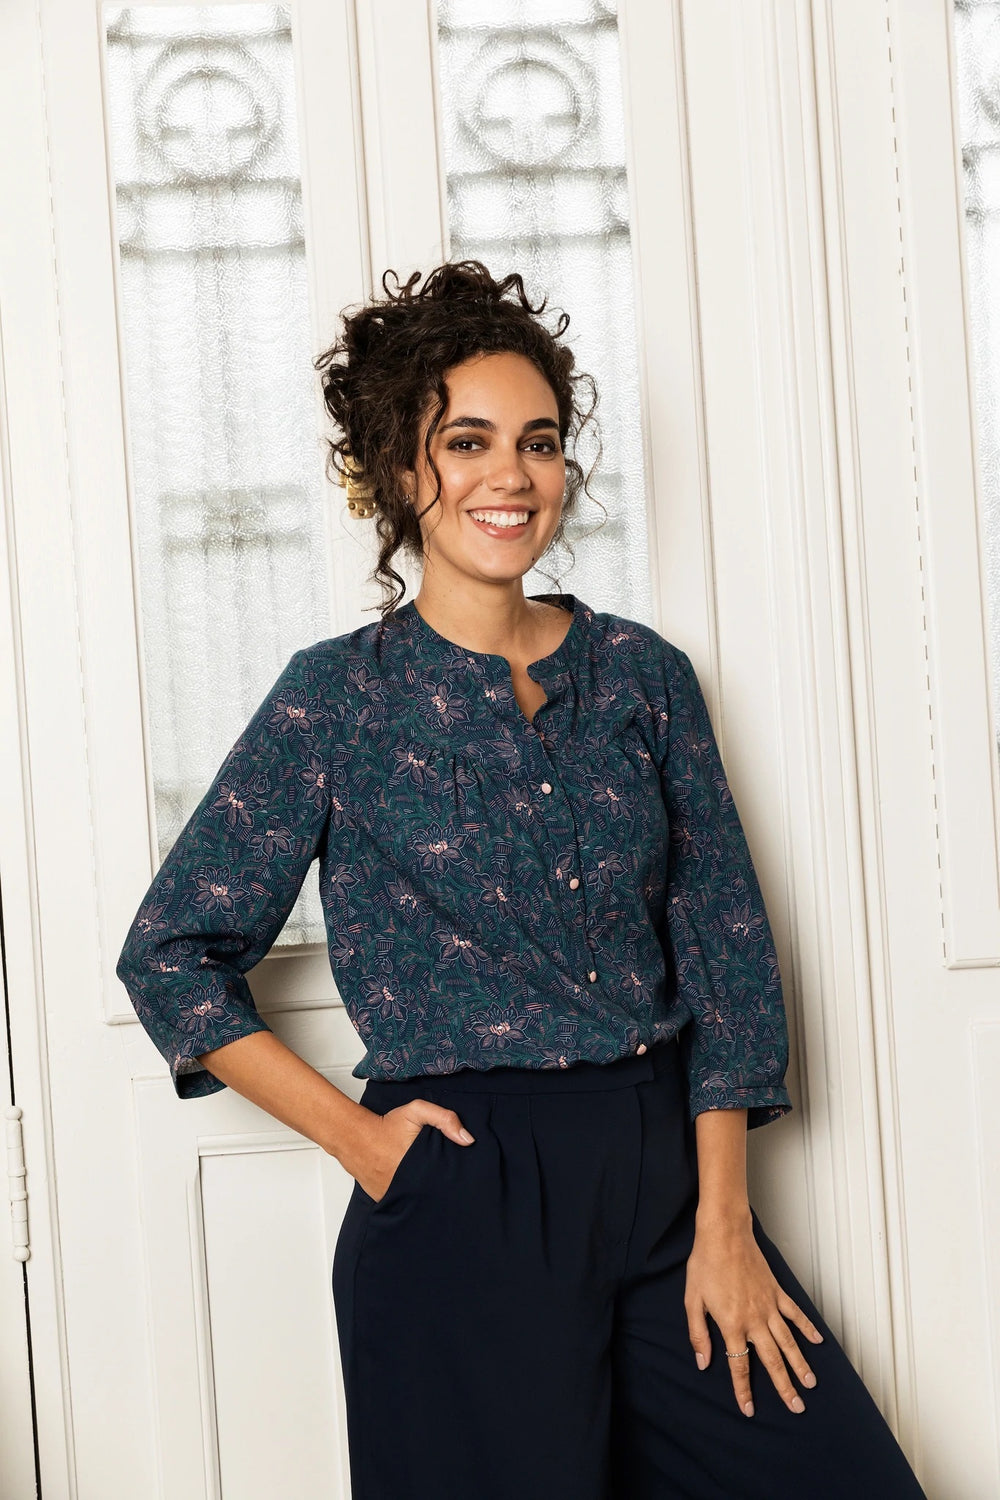 Woman wearing the Frida Blouse sewing pattern from Atelier Jupe on The Fold Line. A blouse pattern made in cotton, viscose, linen or tencel fabrics, featuring a front yoke with gathers, back yoke with inverted pleat, button placket, three-quarter sleeves 